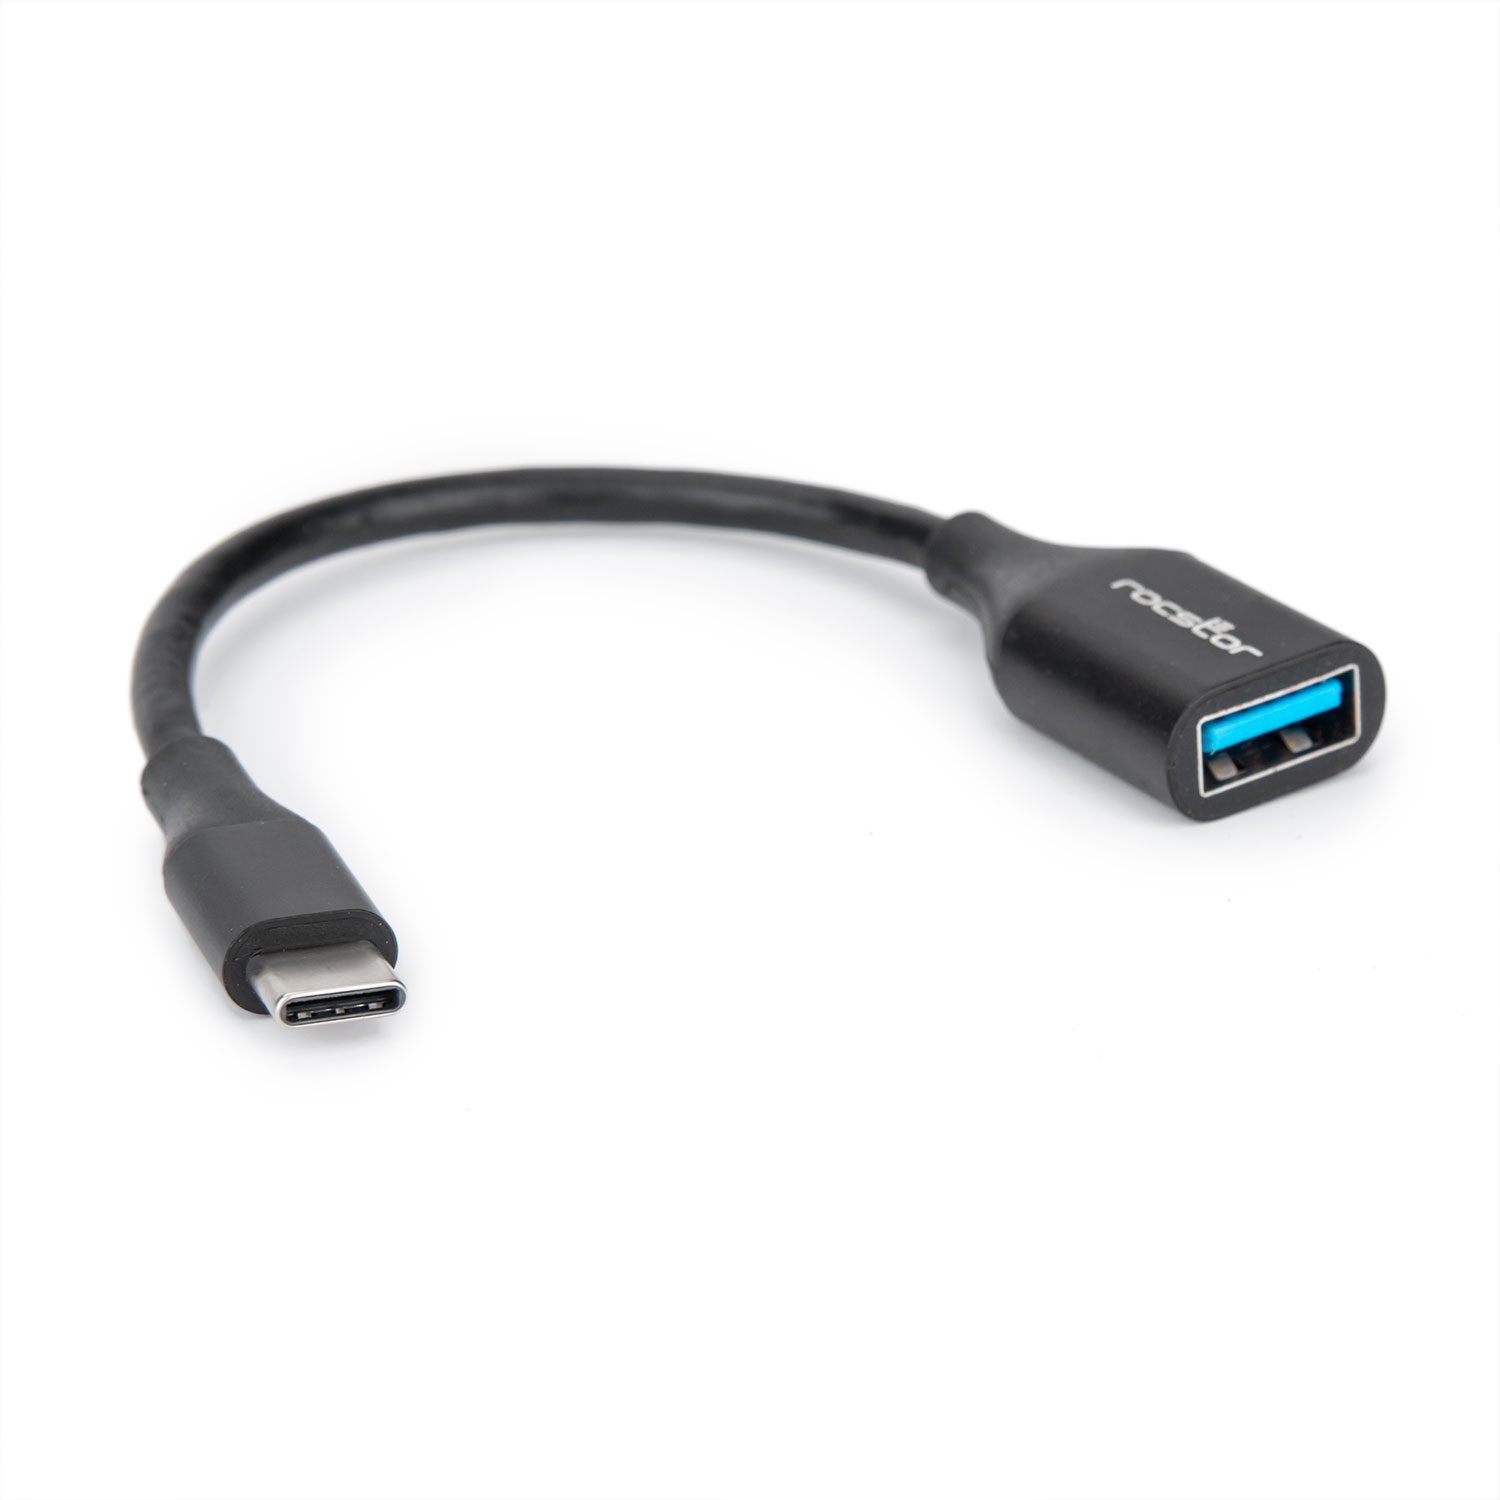 Silicium haak klok USB-C to USB-A (USB 3.0) Cable Adapter - M/F - 6 in Rocstor